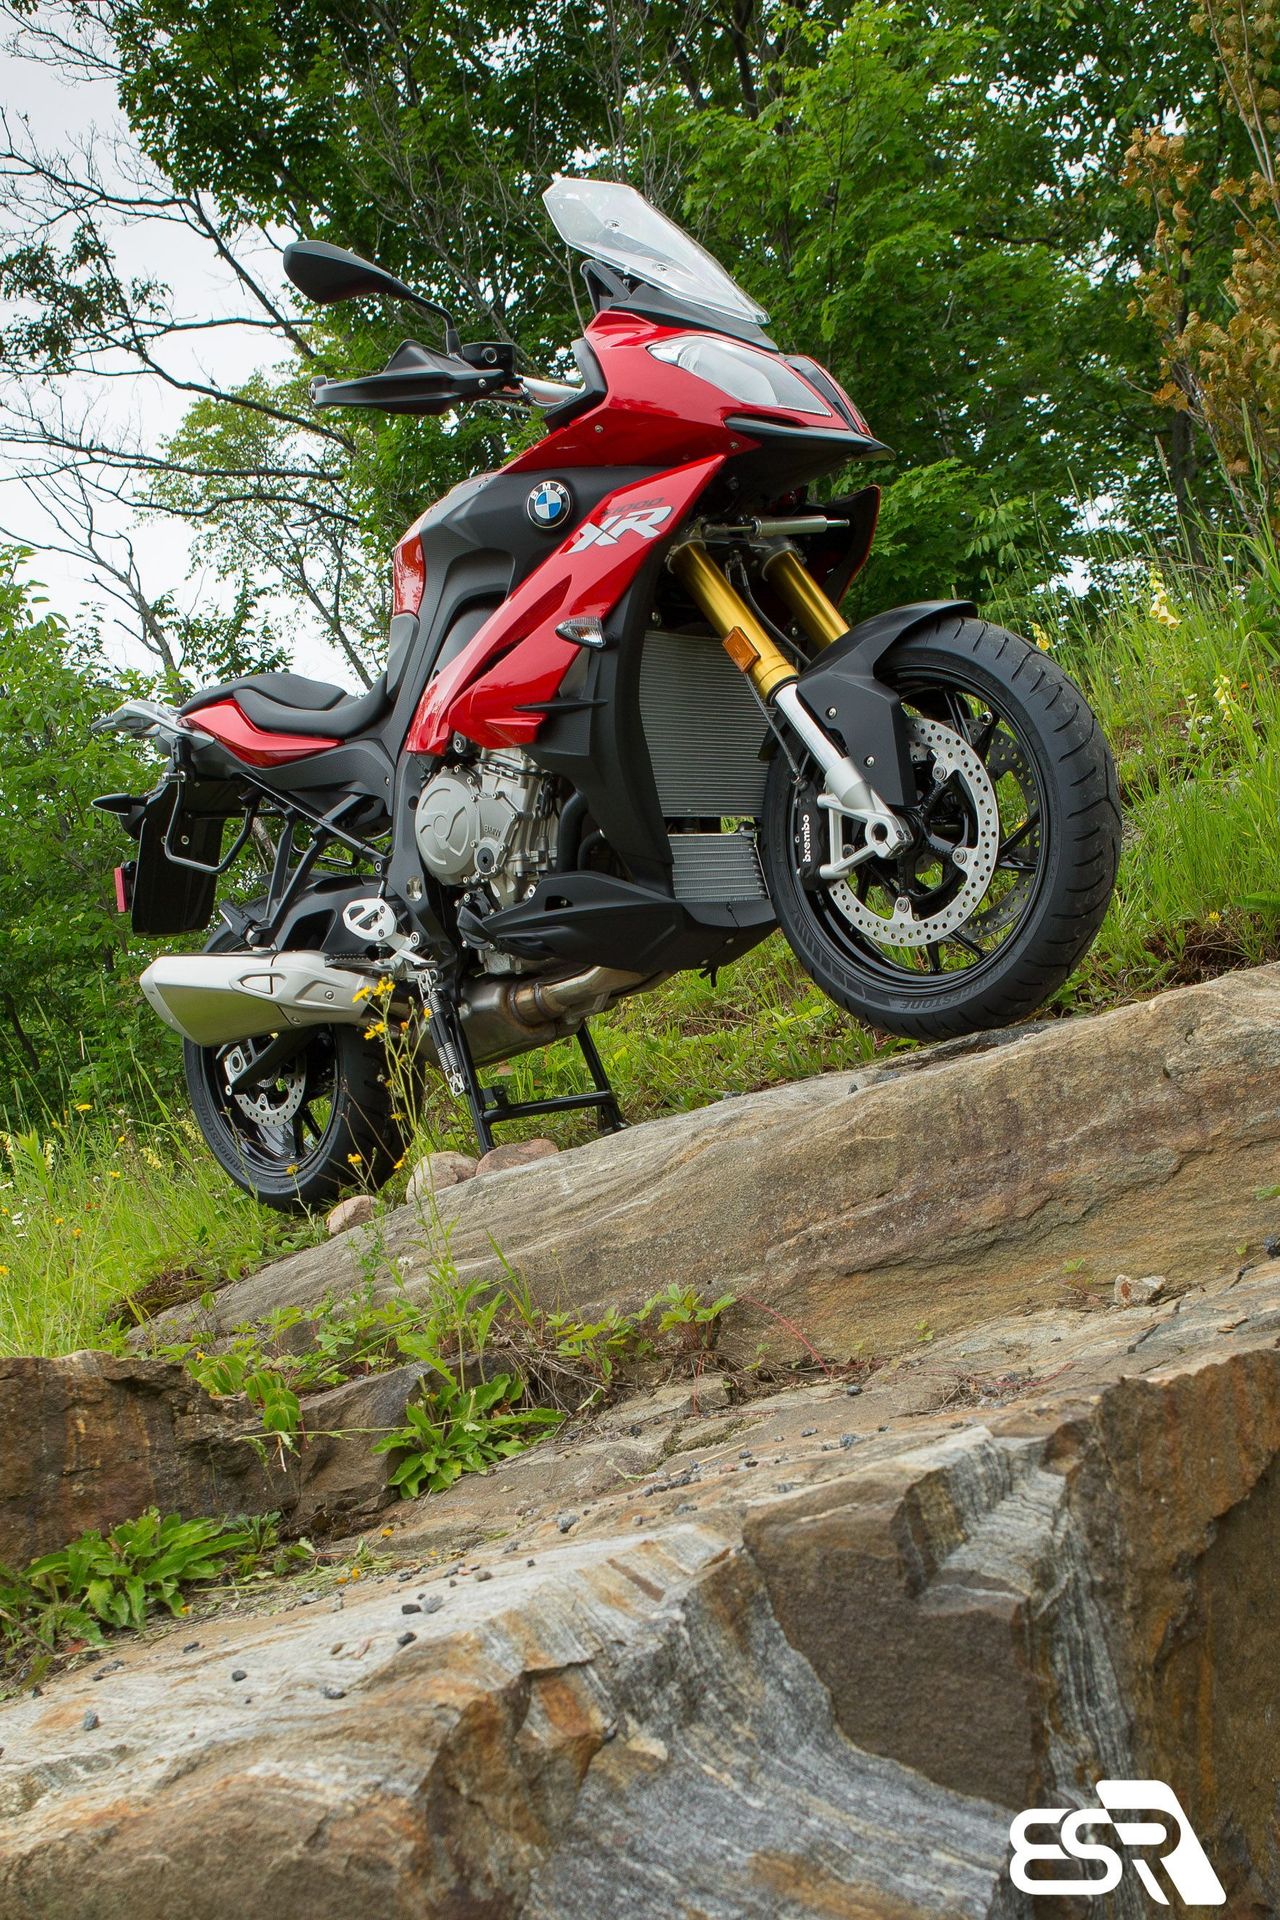 BMW's S1000XR even managed to get up a few rocks